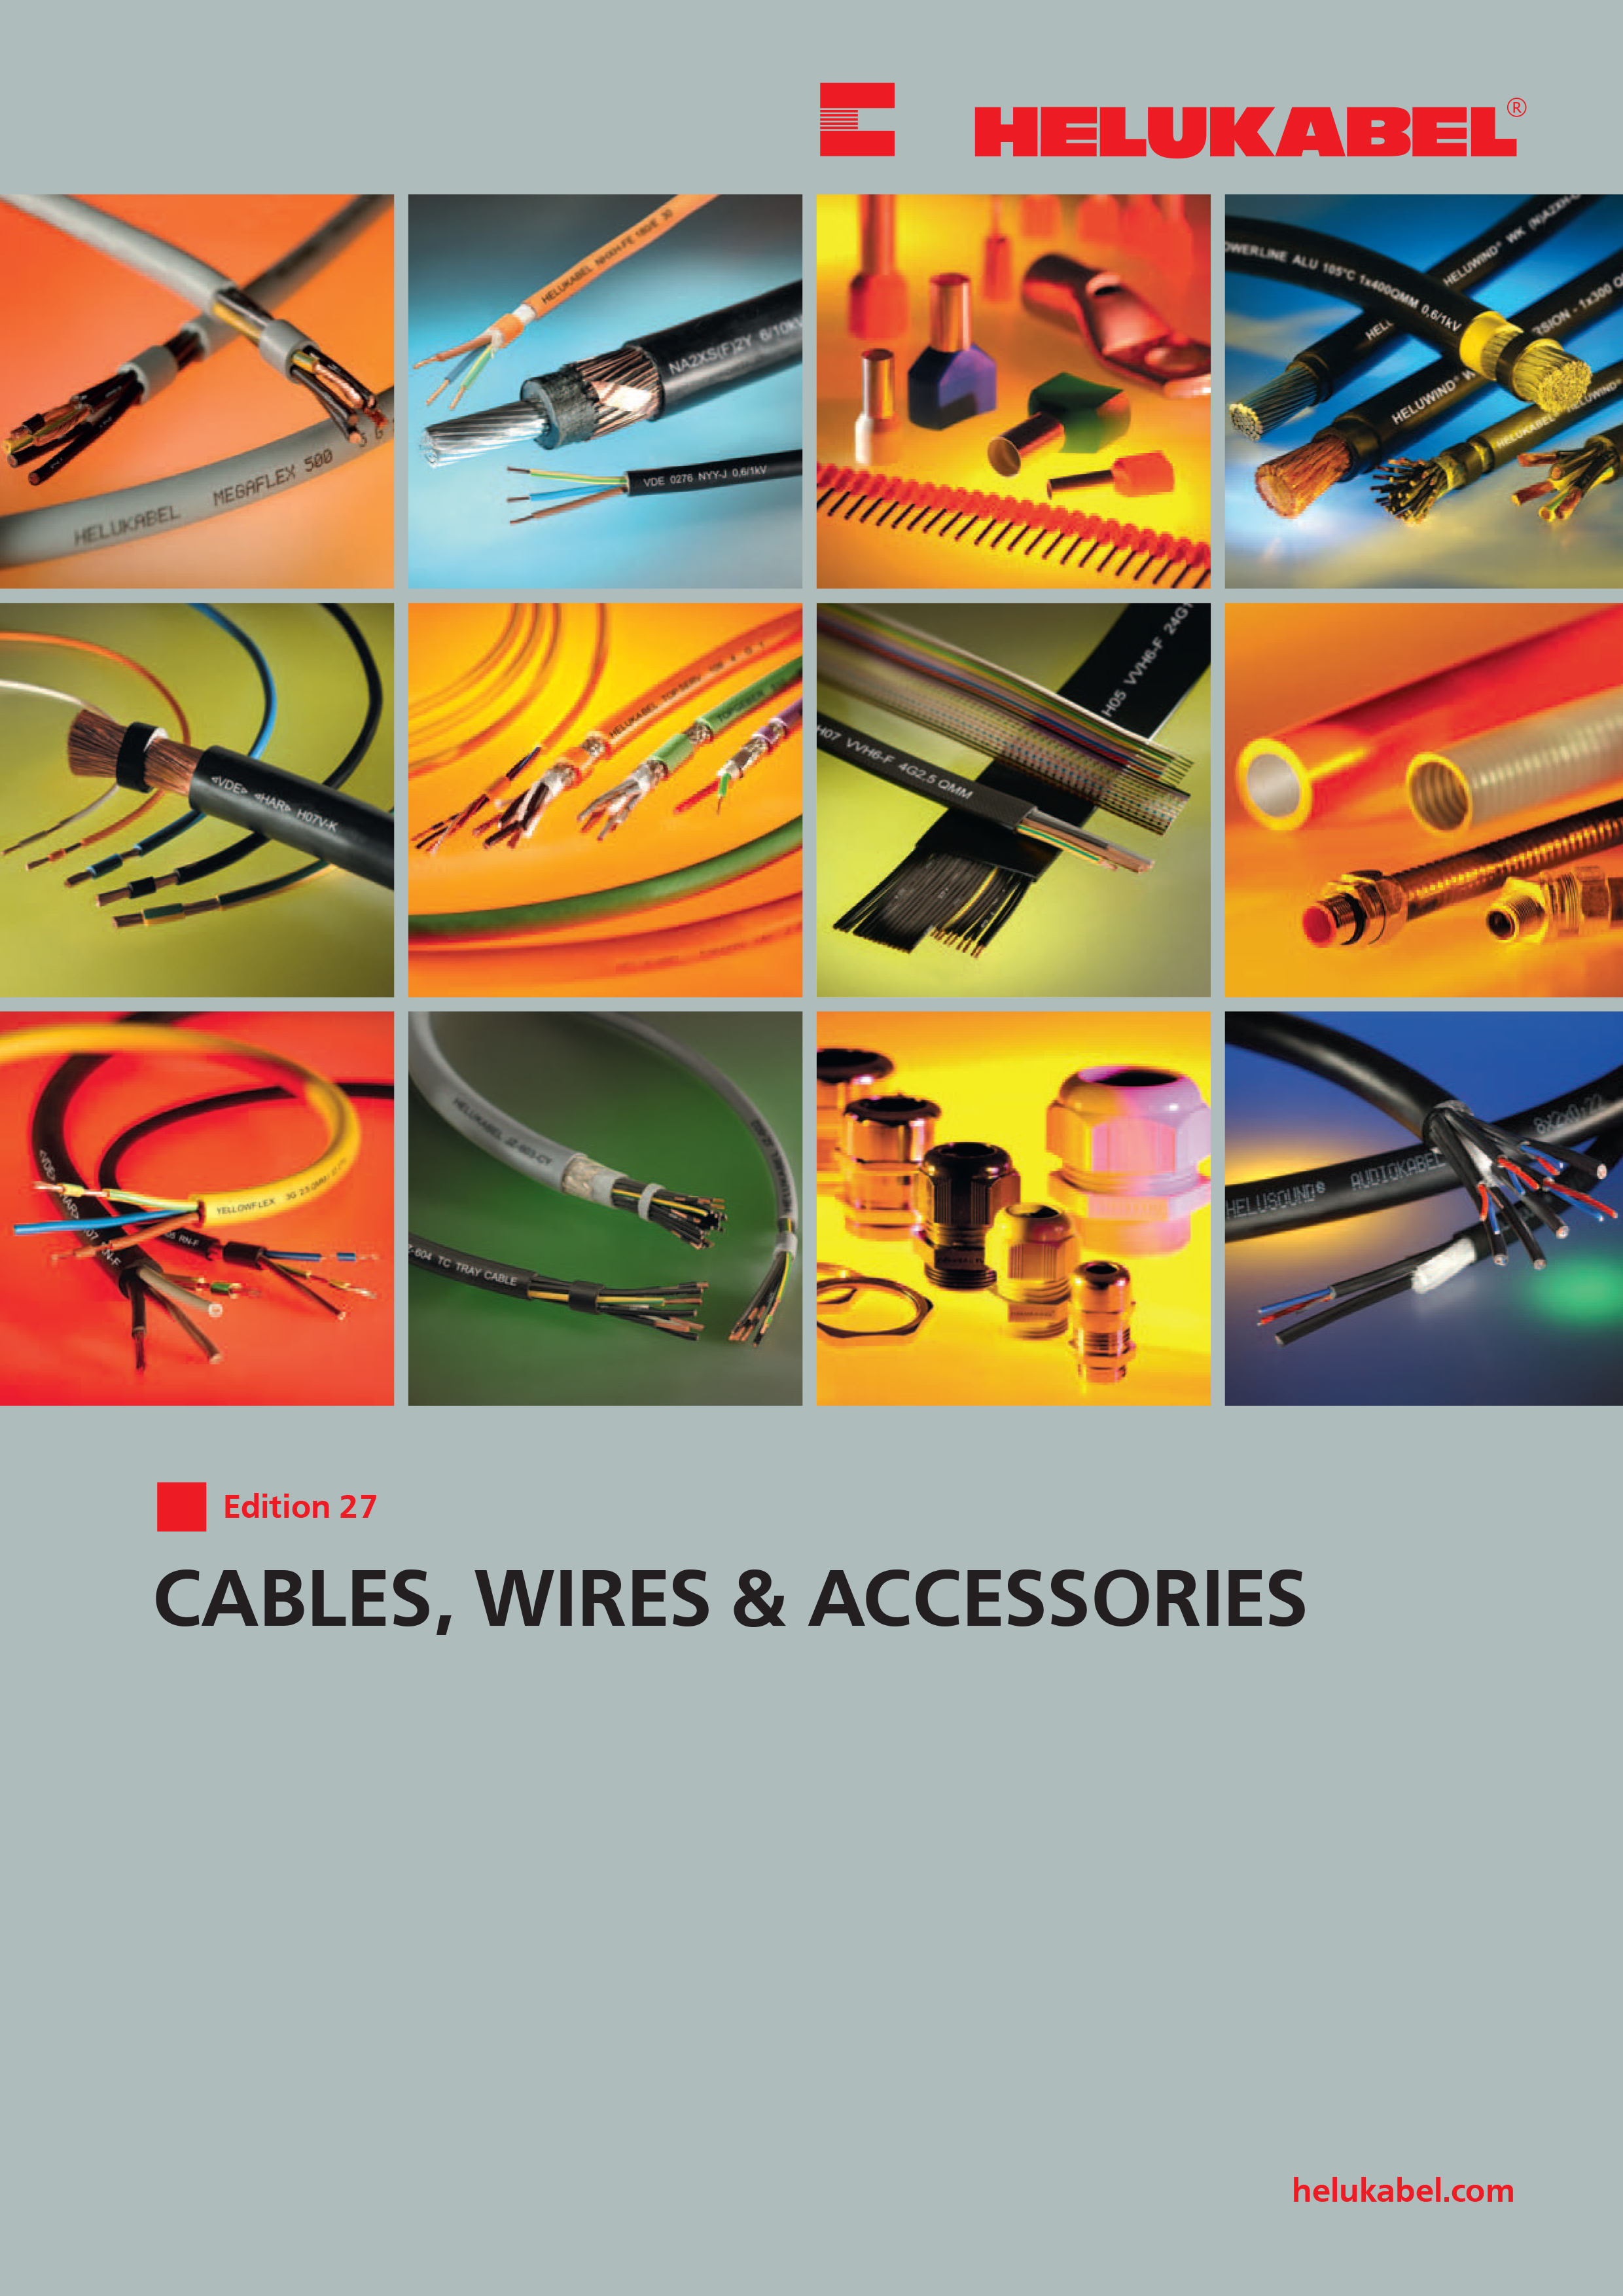 Cables, Wires & Accessories Ed. 27